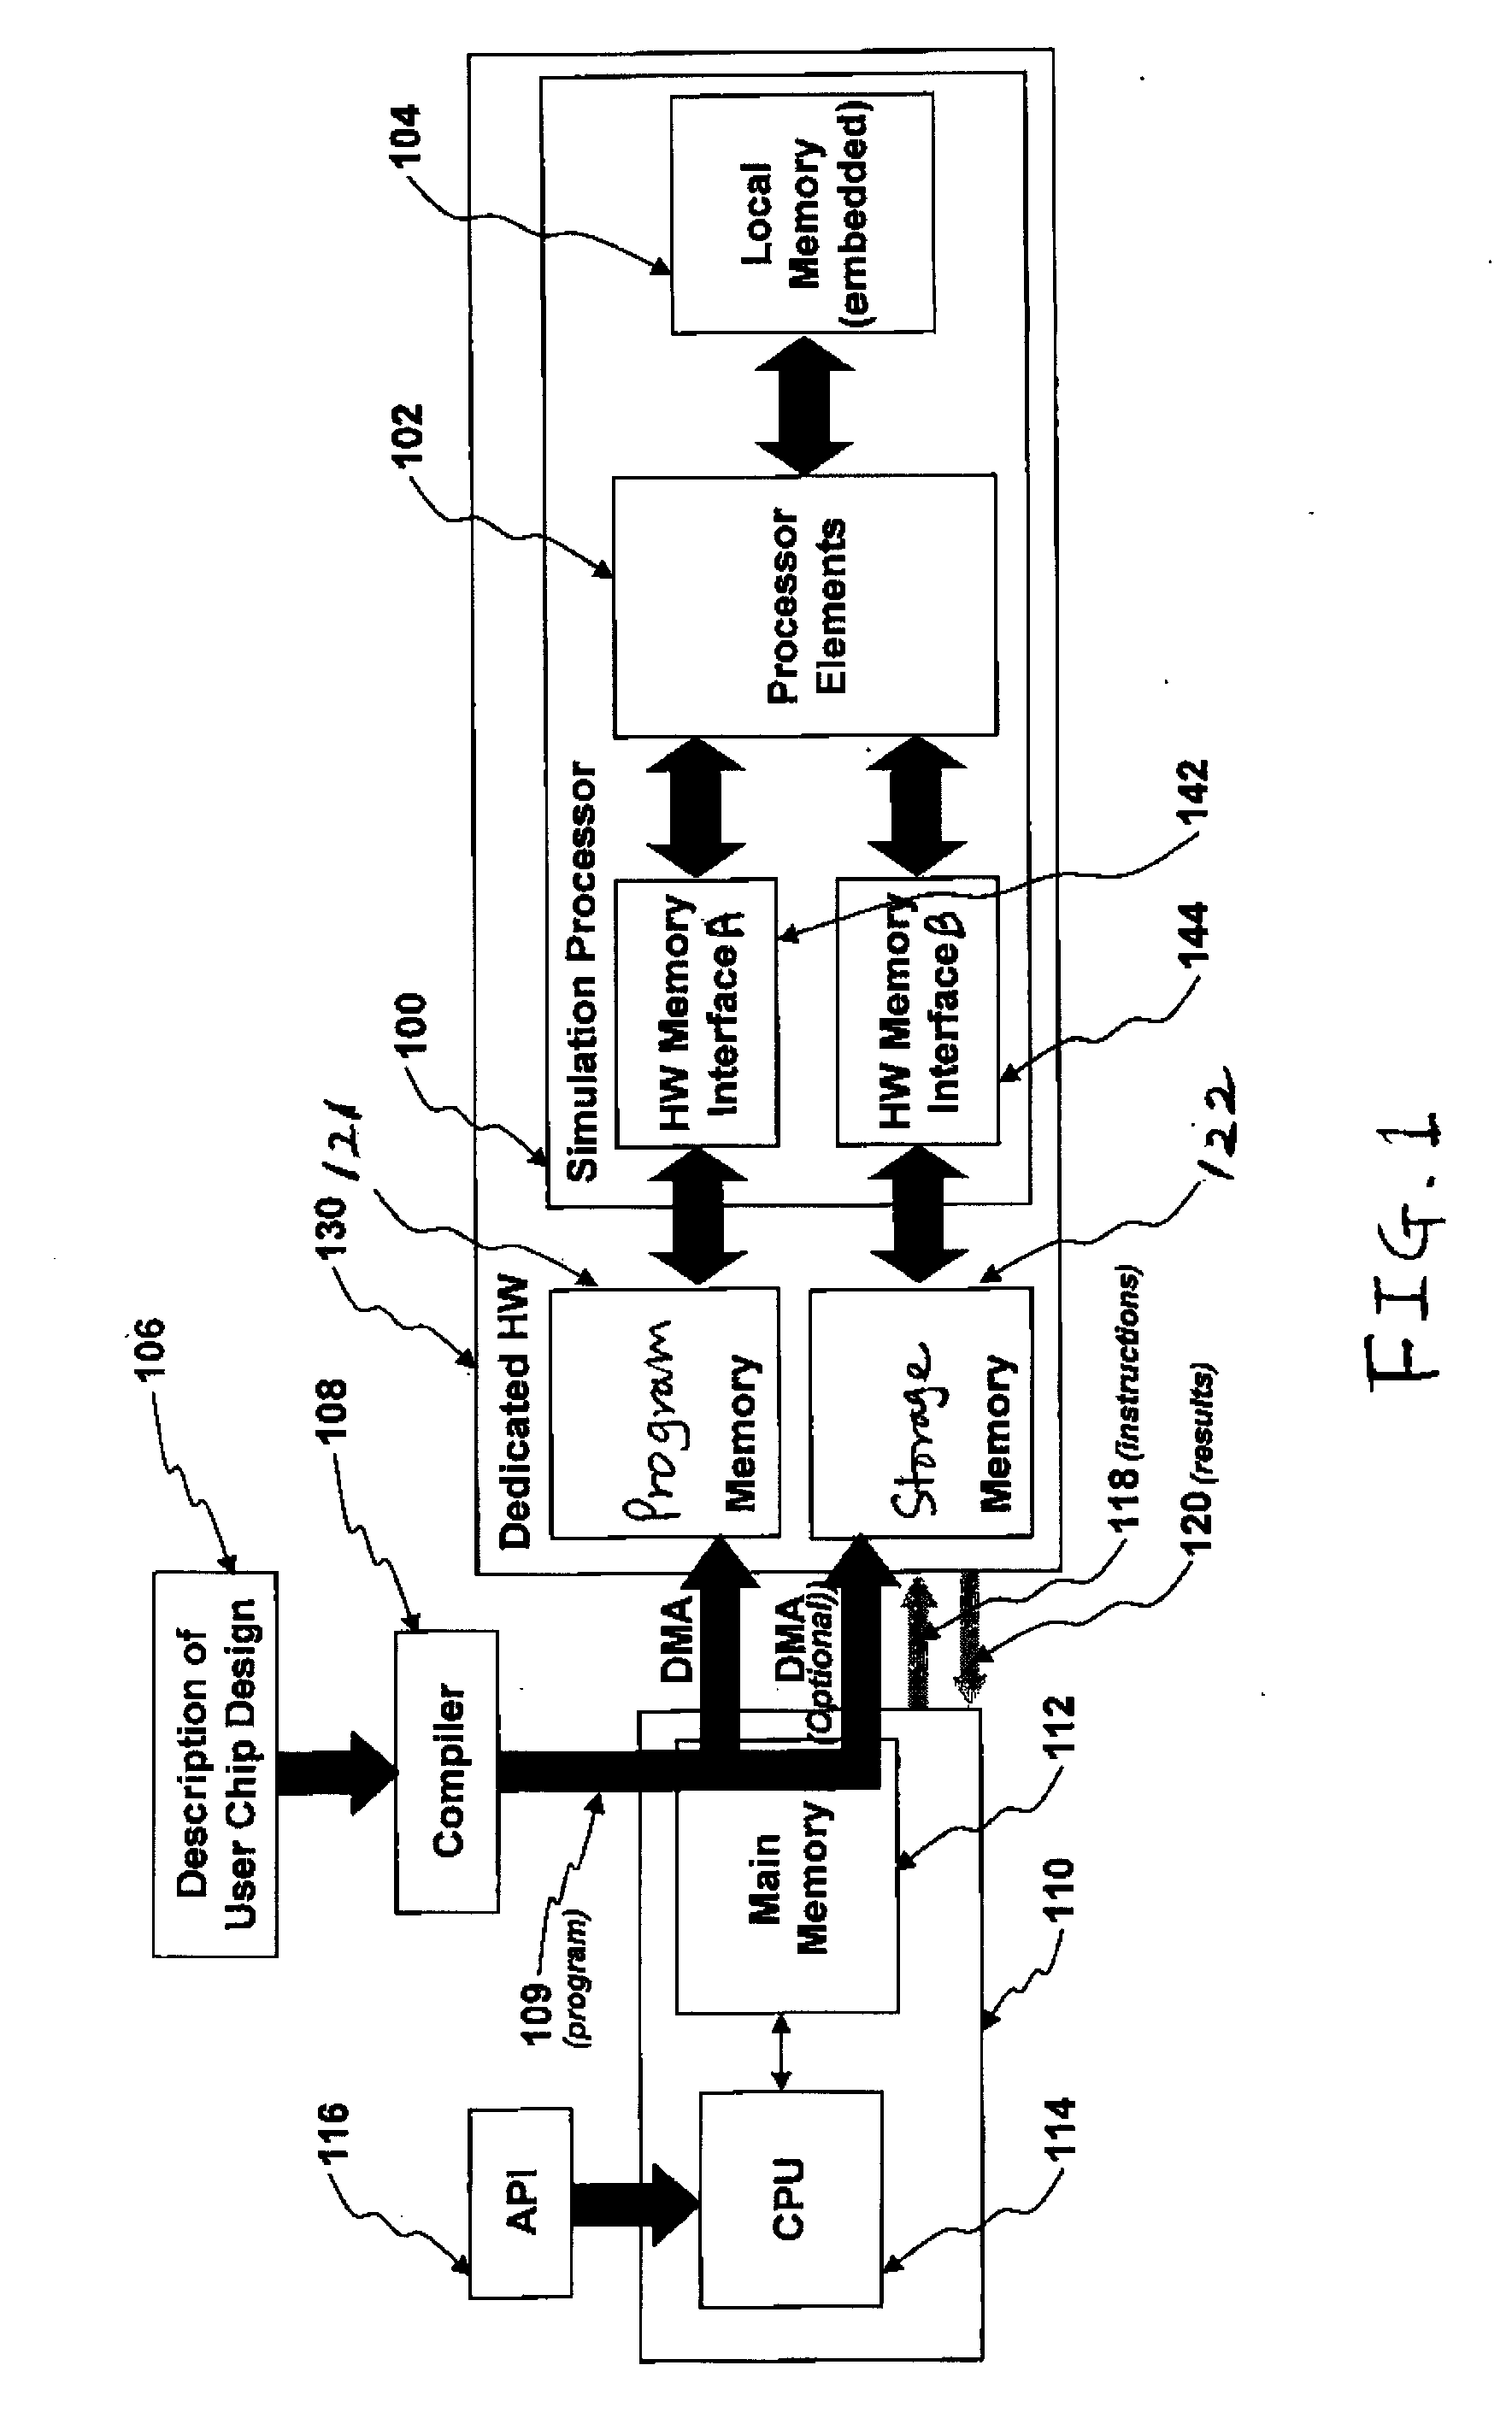 VLIW Acceleration System Using Multi-state Logic